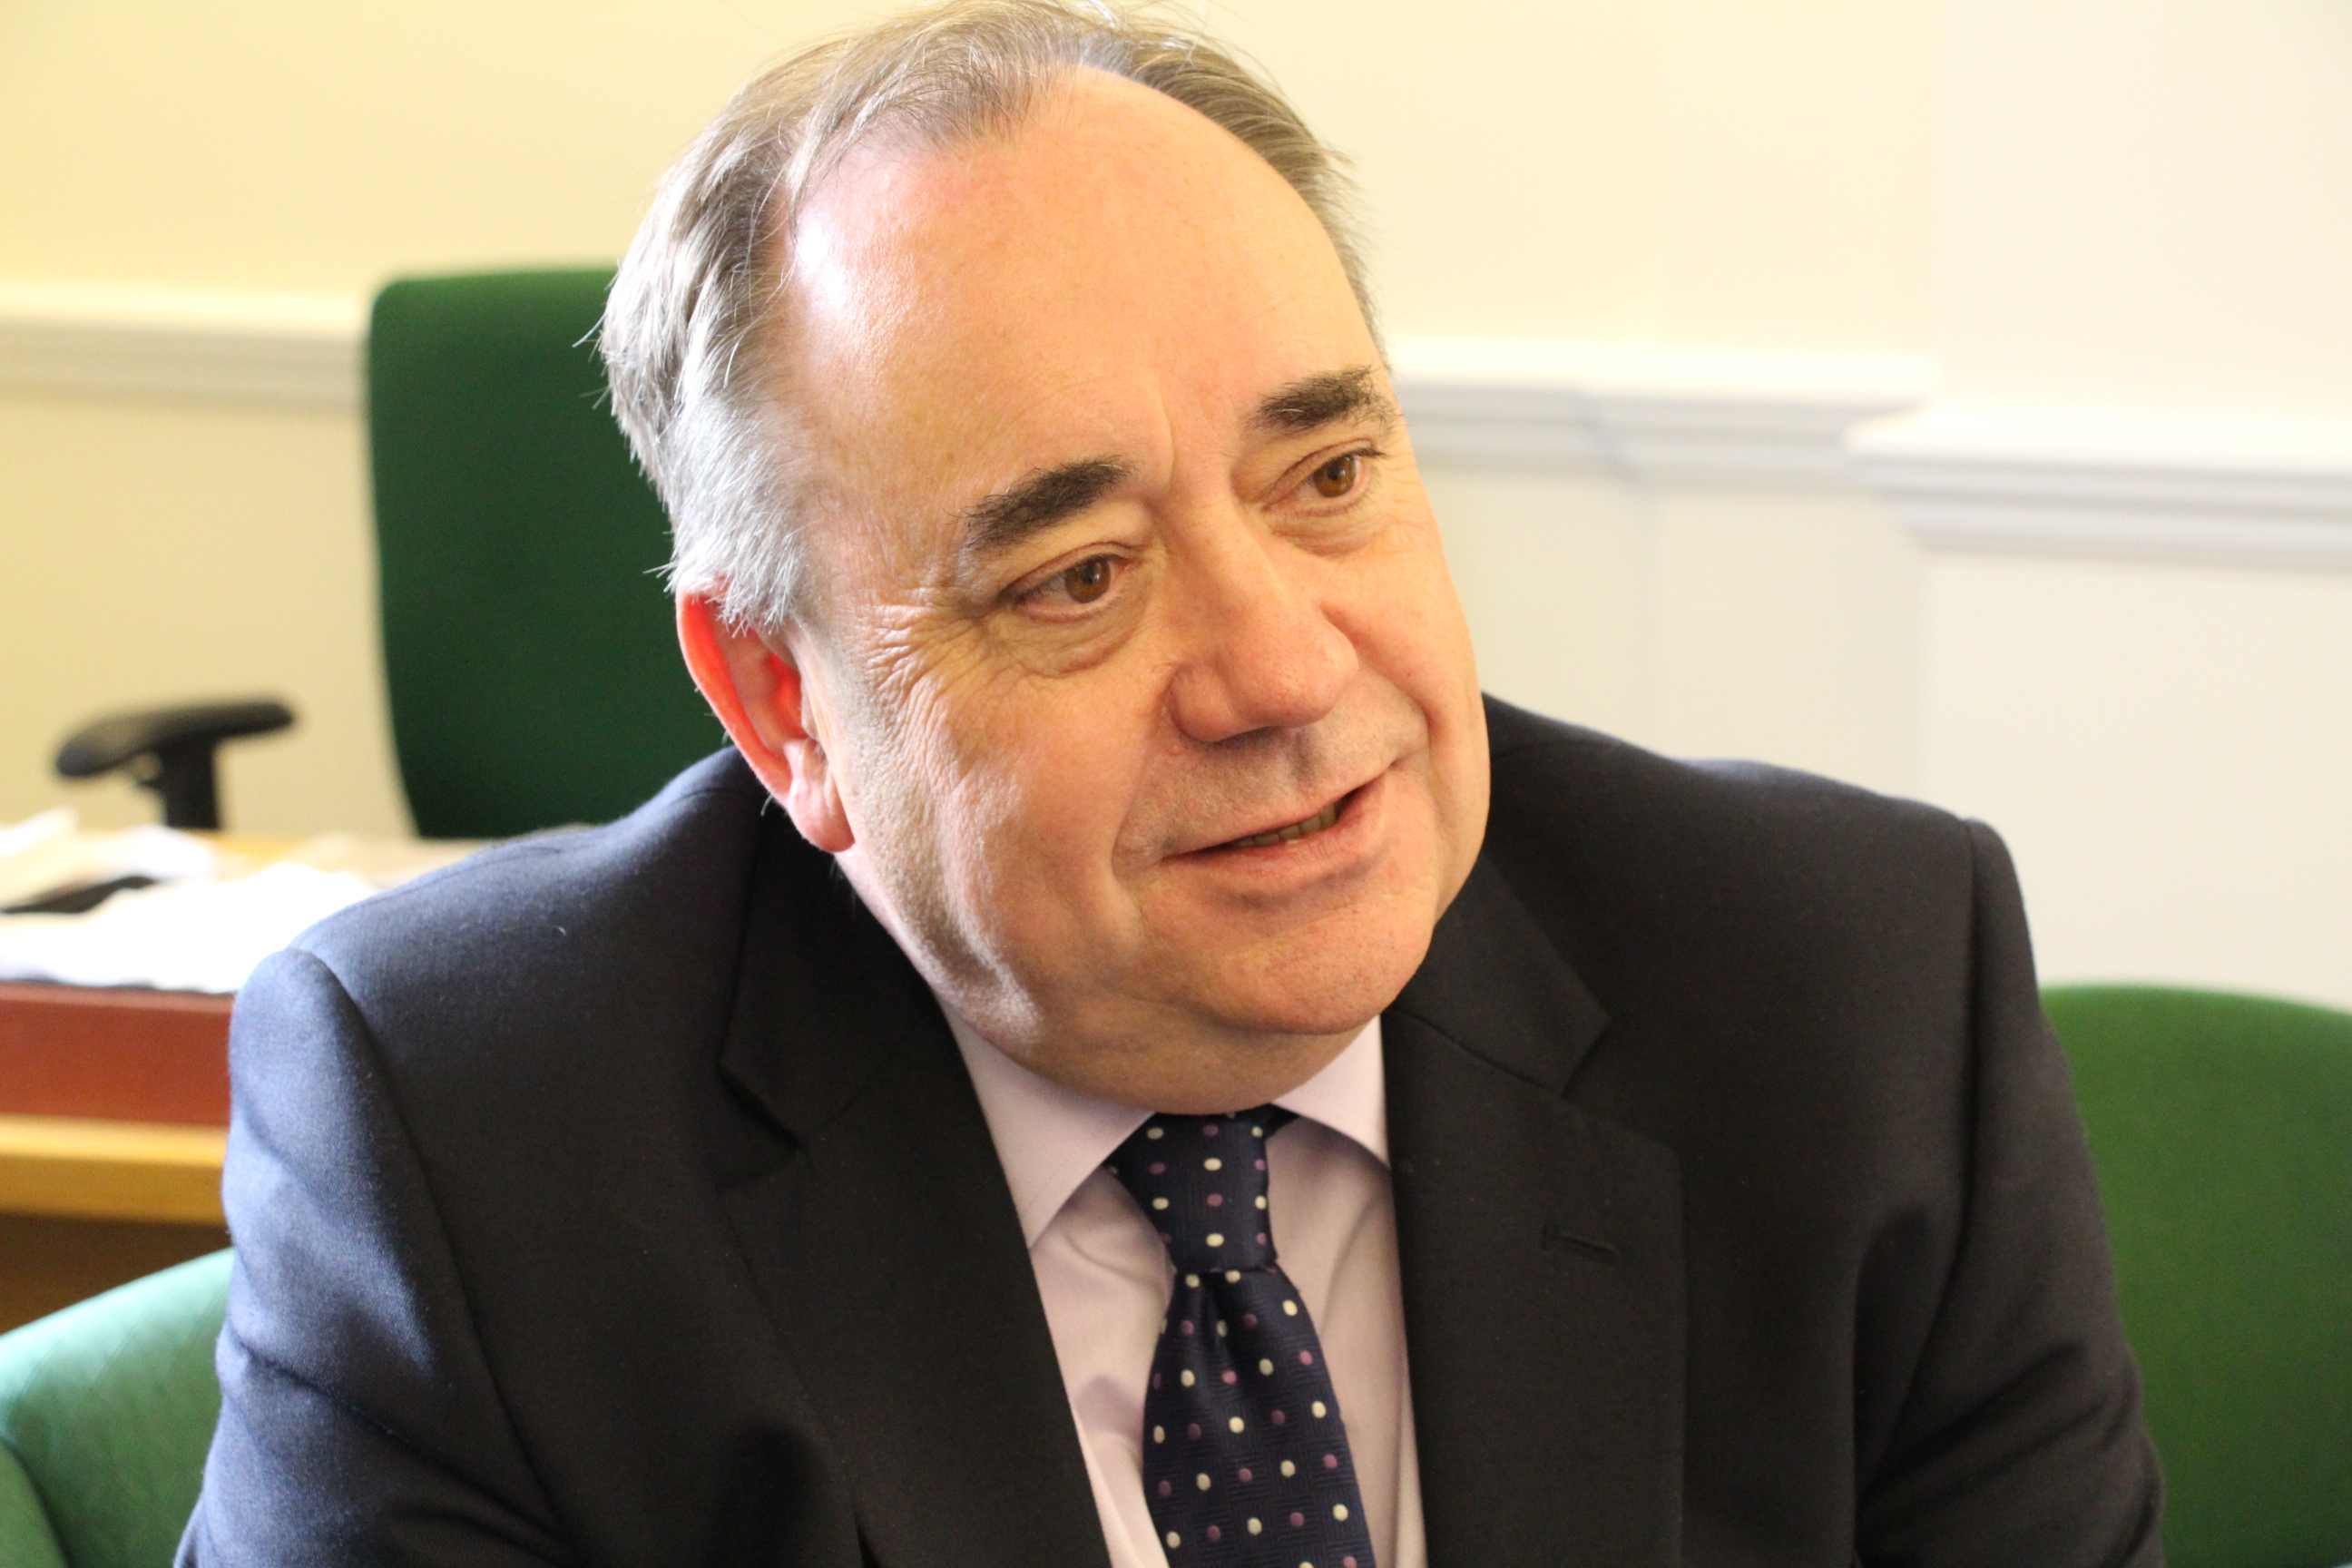 Former Scottish Prime Minister, Alex Salmond, during an interview with CNA